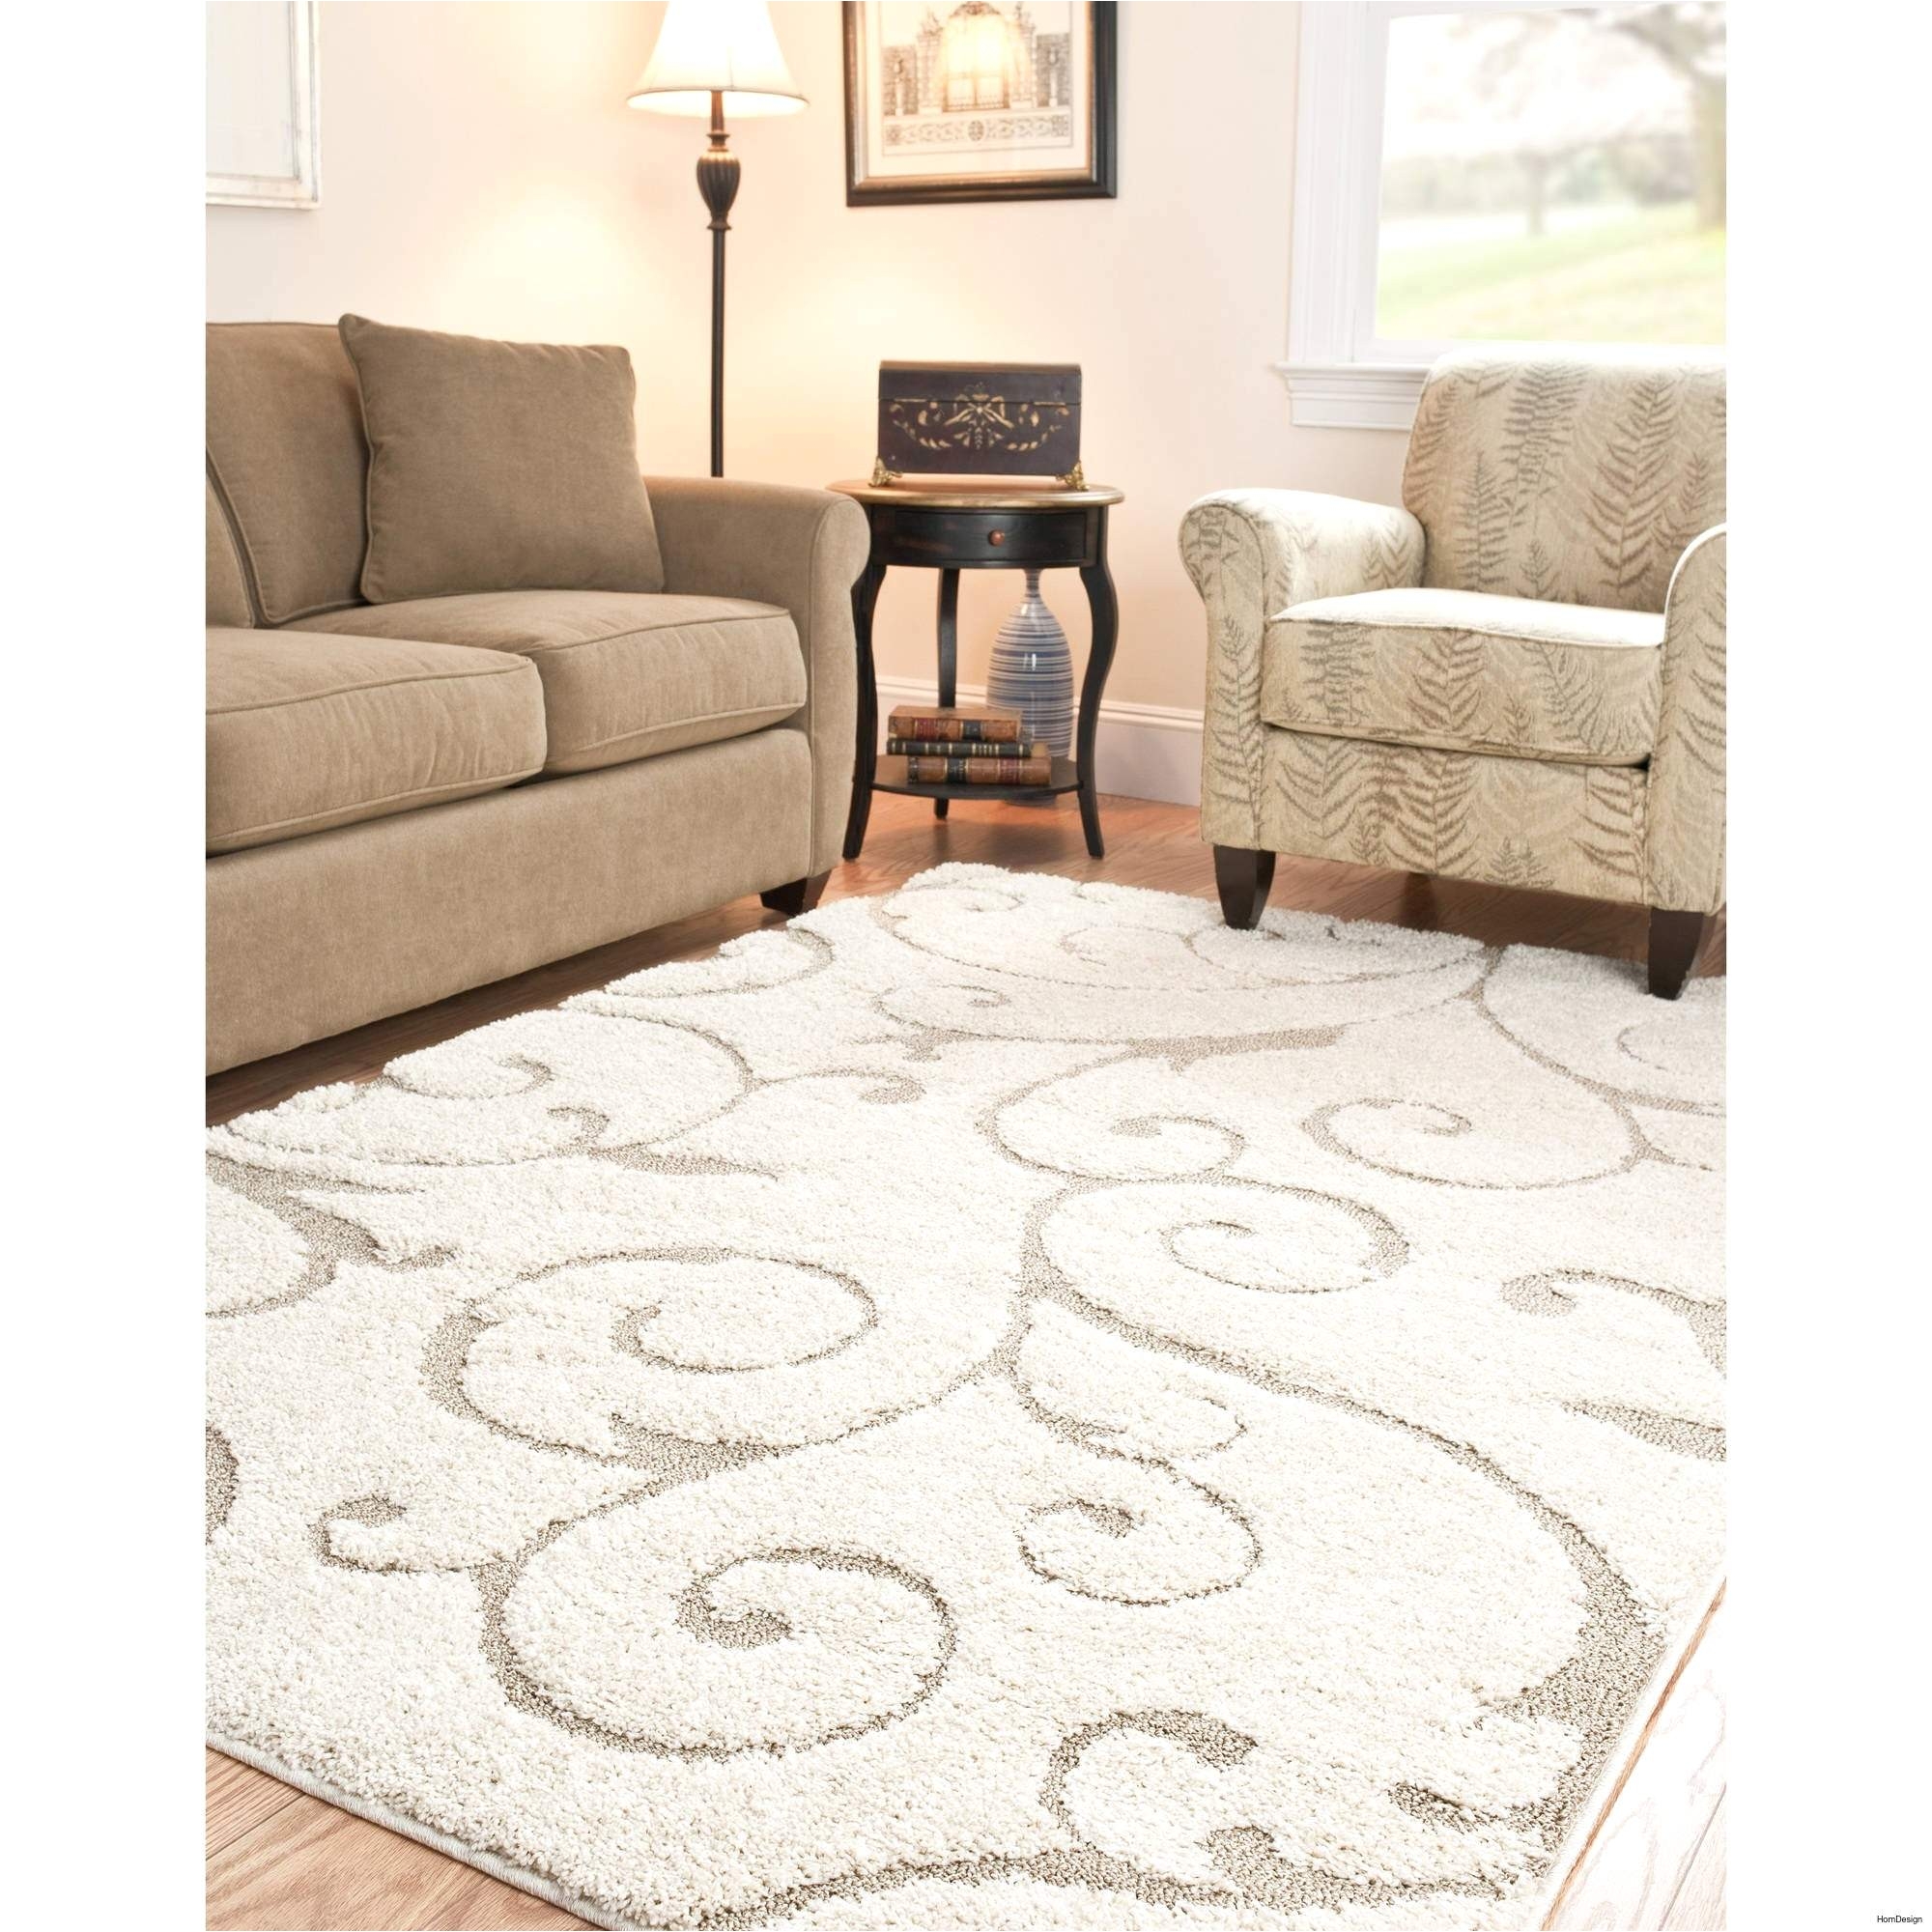 how to buy an area rug for living room inspirational 34 lovely gold area rug 8